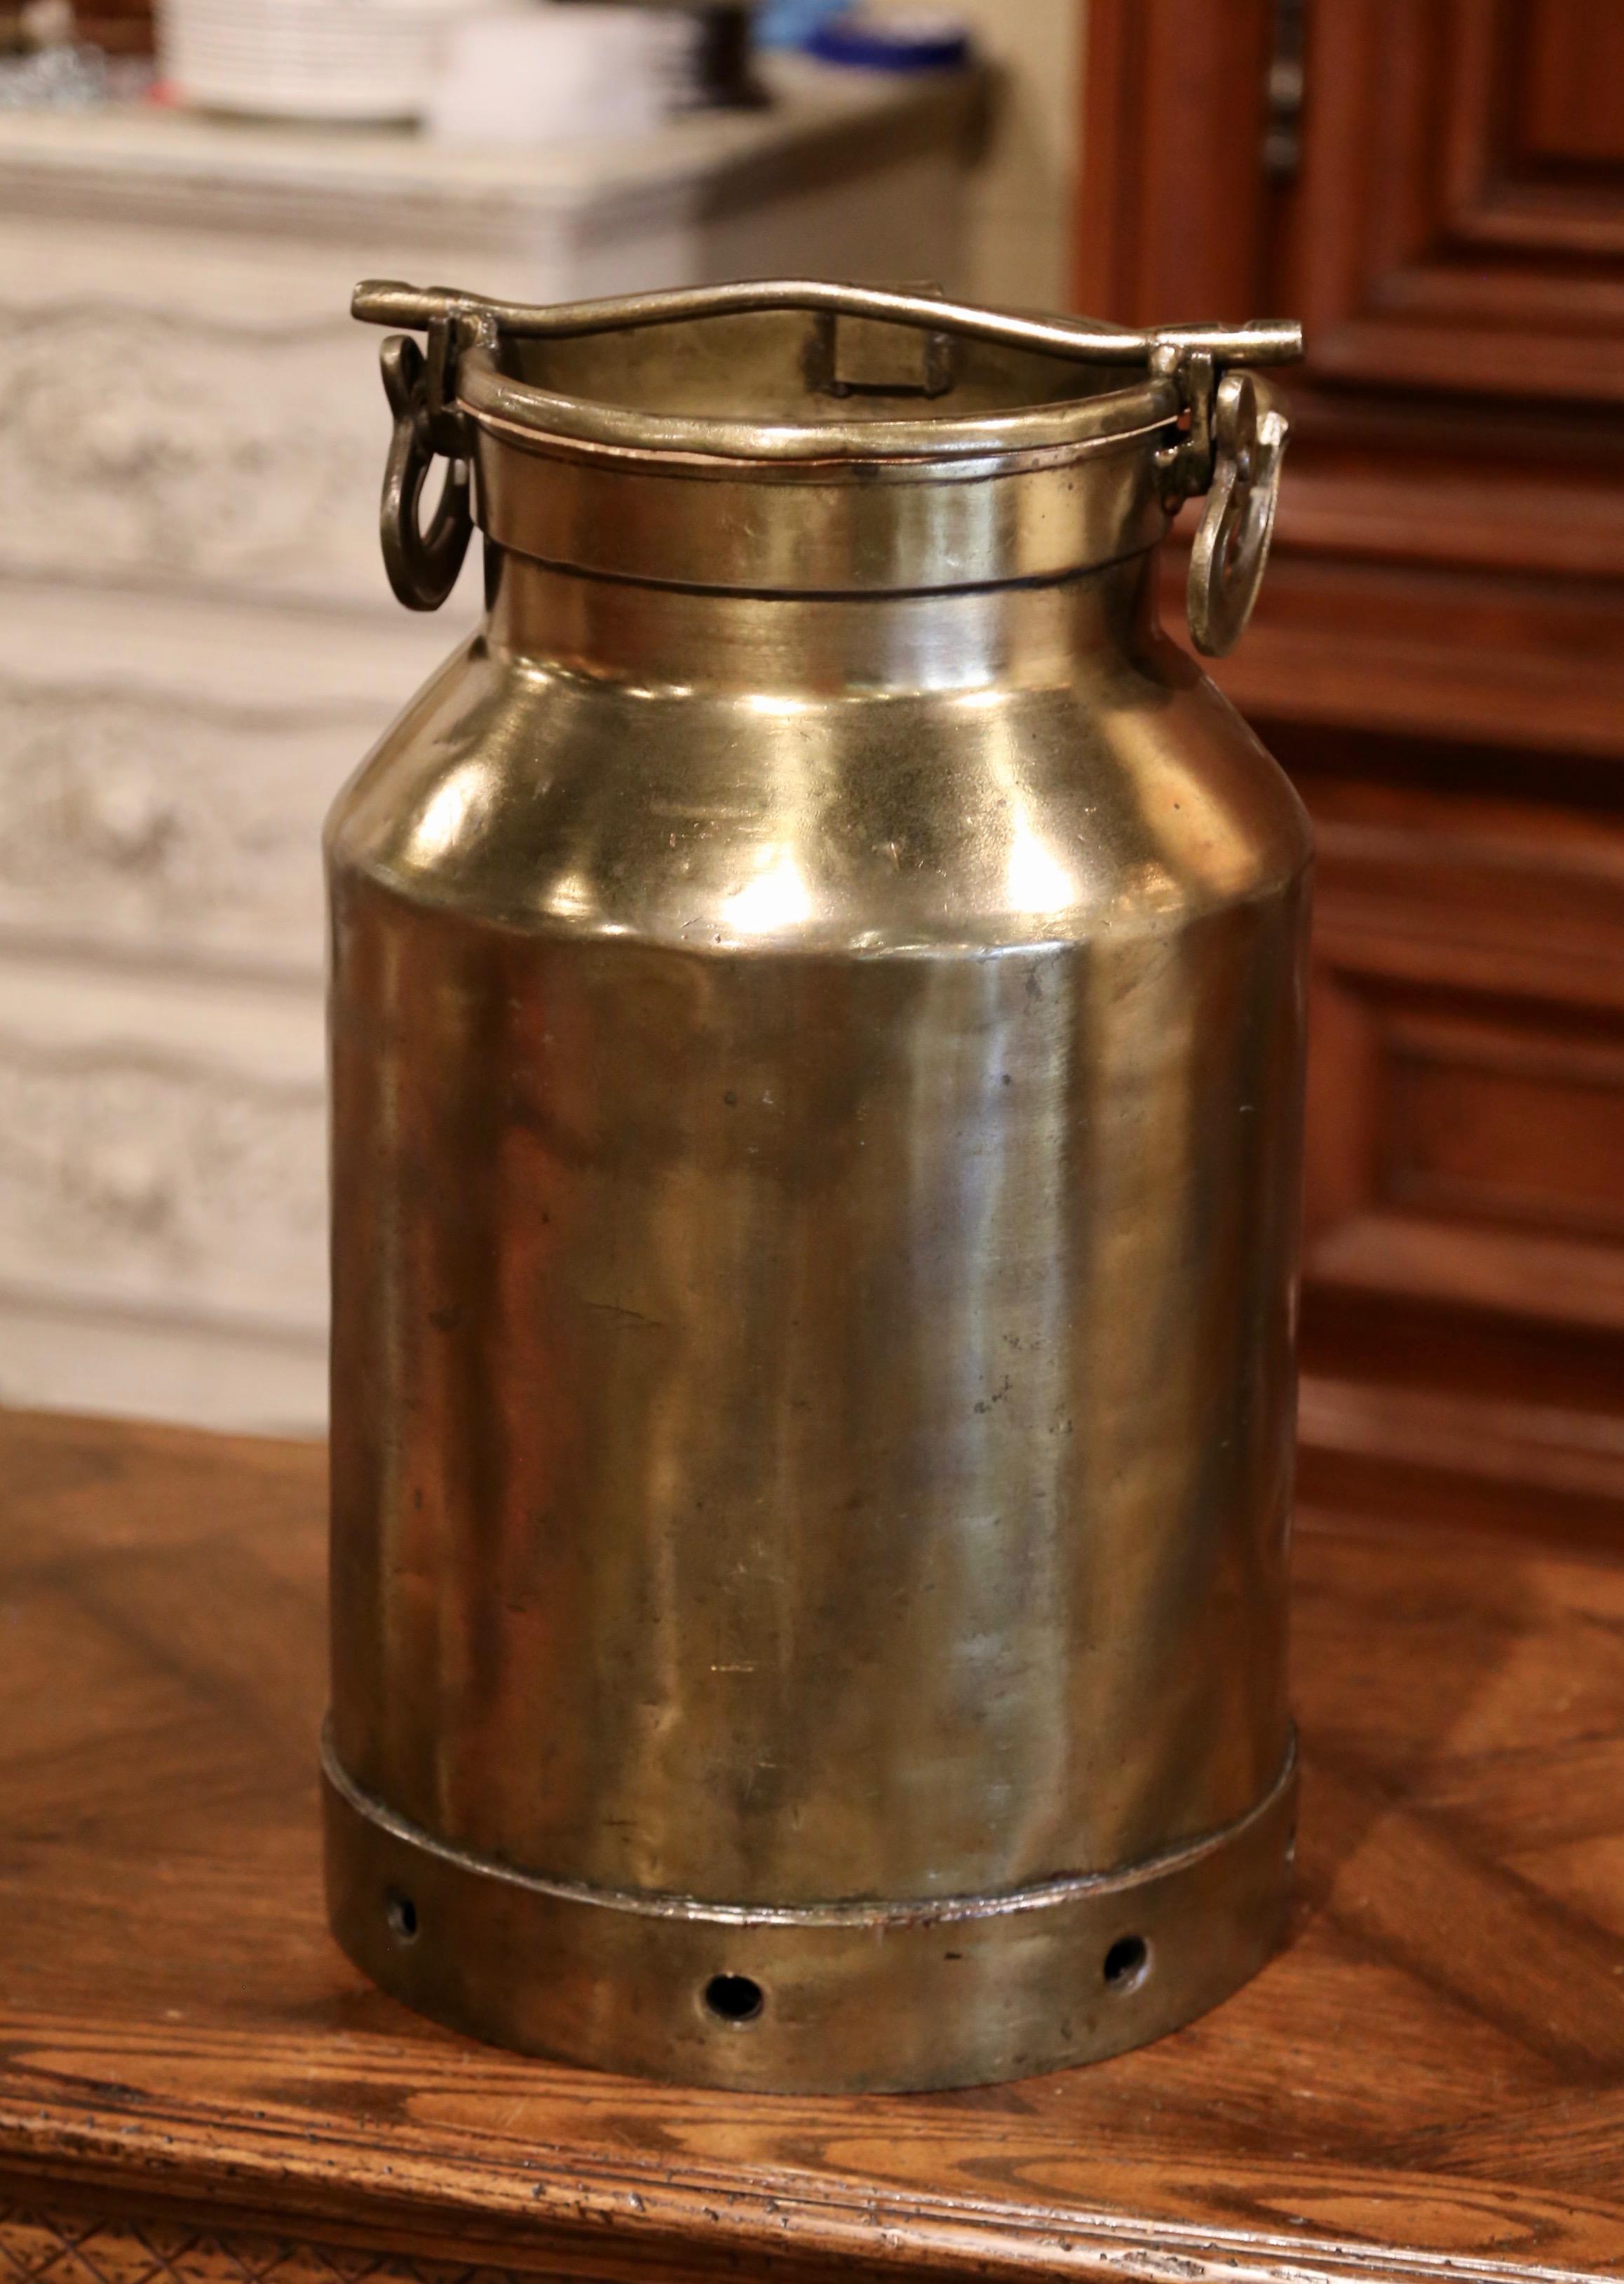 Keep your house organized by placing this beautiful, antique milk can as an umbrella stand by your front or back door. Crafted in France circa 1880, the tall brass container has a moveable, arched top handle and original removable lid. The large,